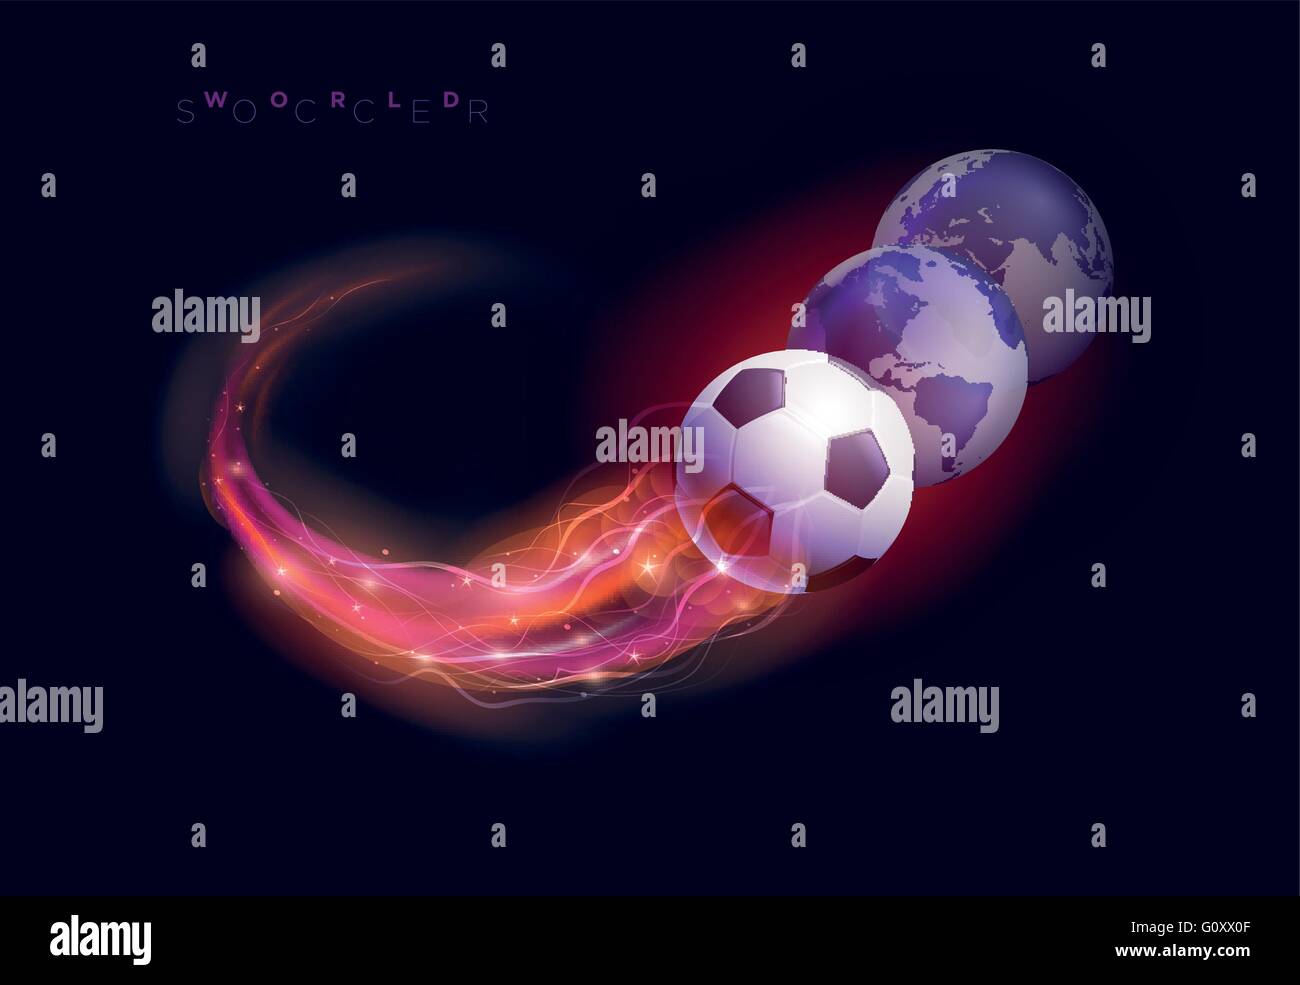 Soccer ball in flames and spheres against black background. Vector illustration. Stock Vector